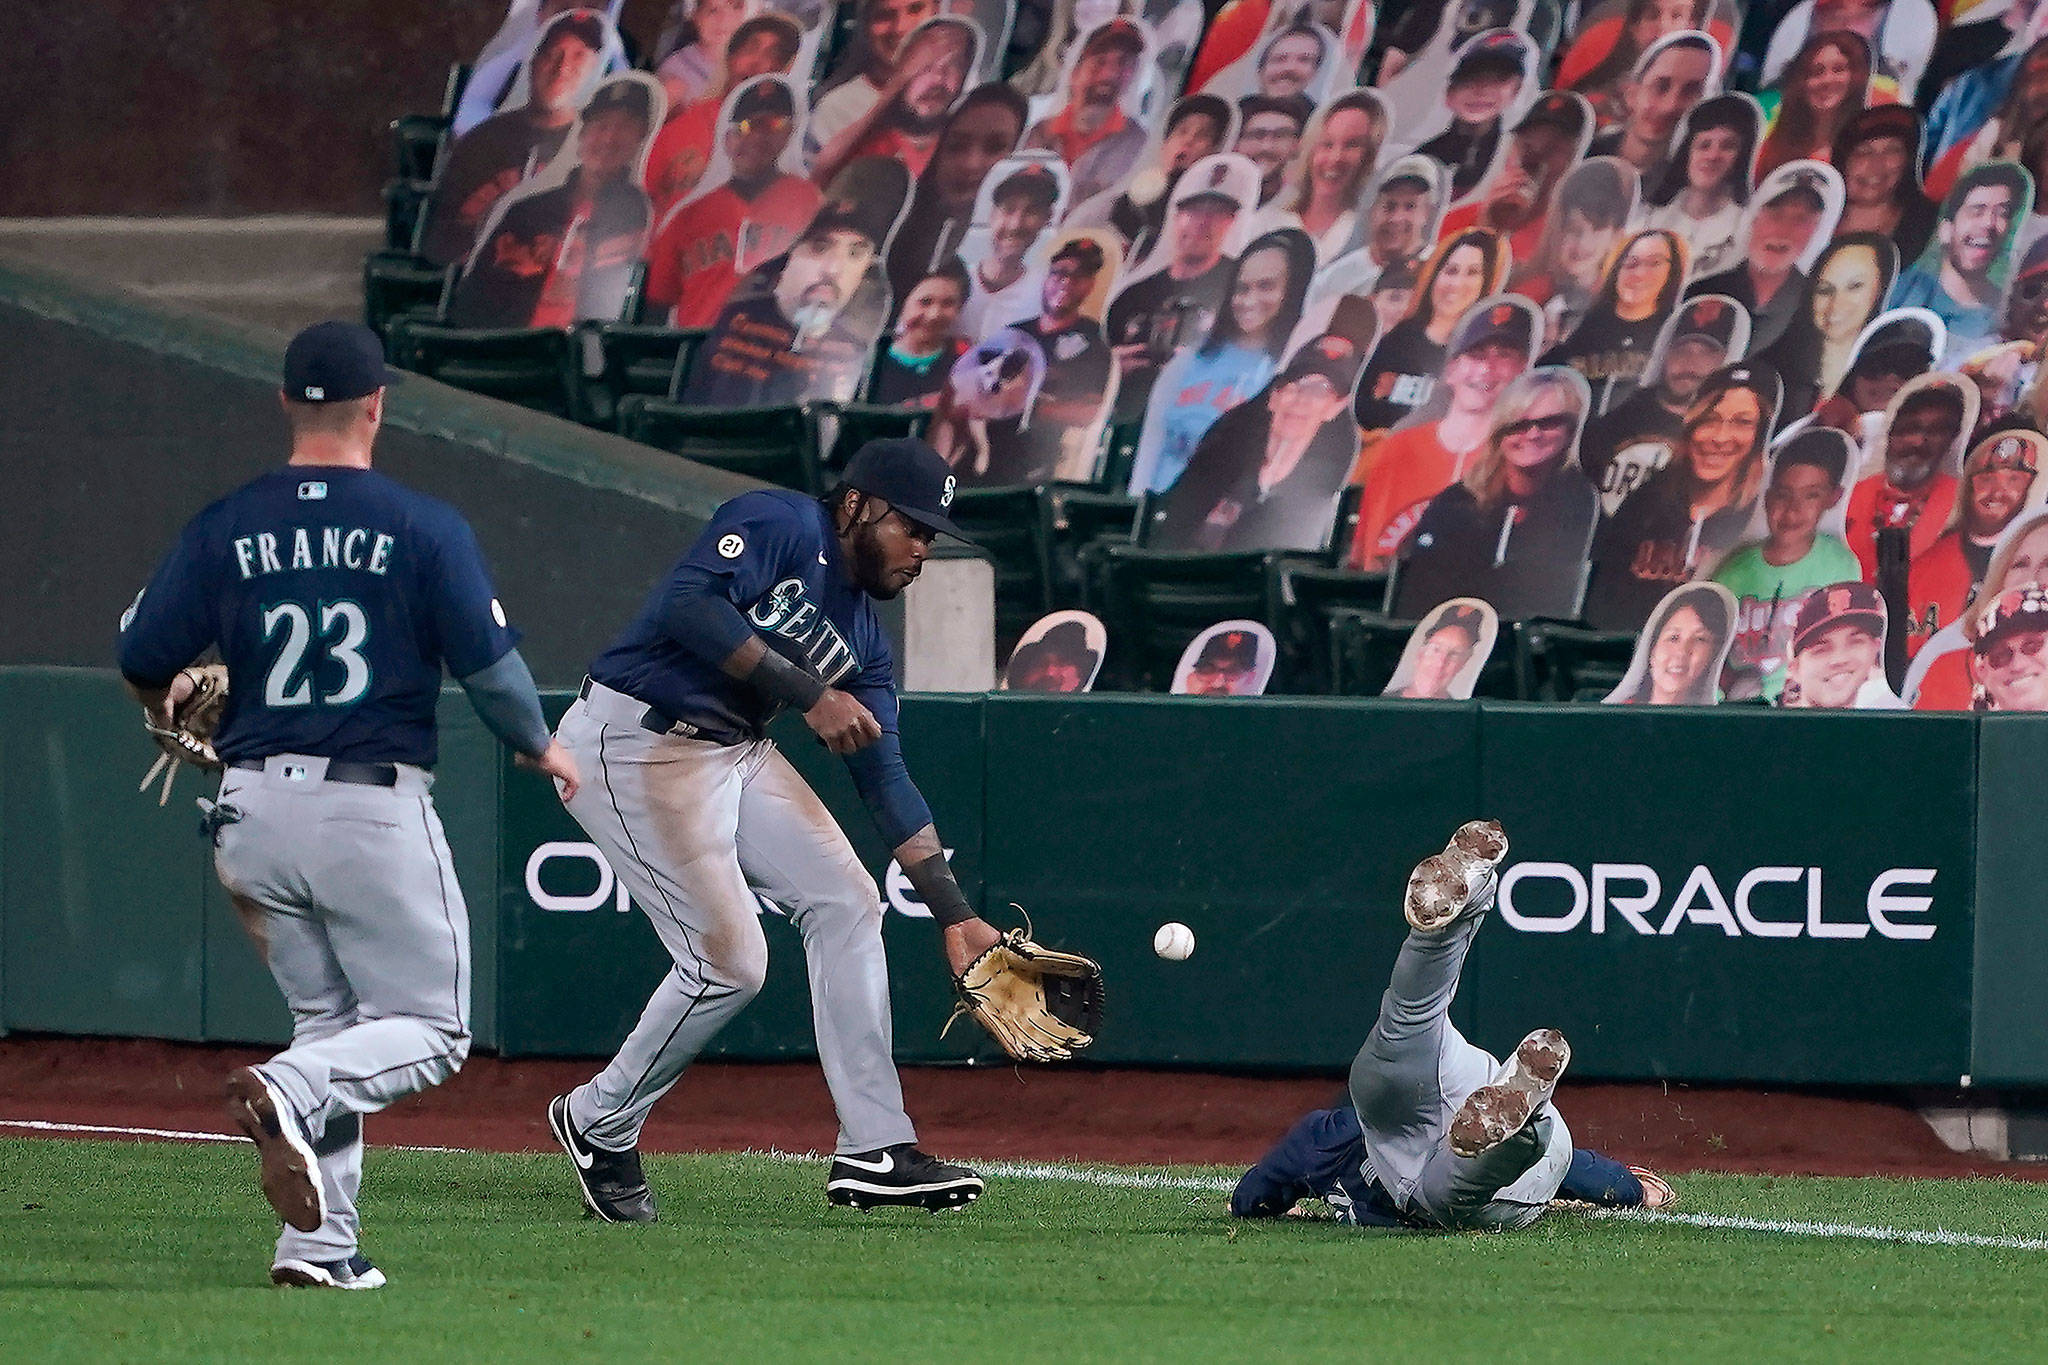 Mariners first baseman Evan White (right) dives for but can’t make the catch on a double by the Giants’ Wilmer Flores, as right fielder Phillip Ervin (center) and second baseman Ty France (23) come to assist during the fourth inning of a game Sept. 9, 2020, in San Francisco. (AP Photo/Tony Avelar)